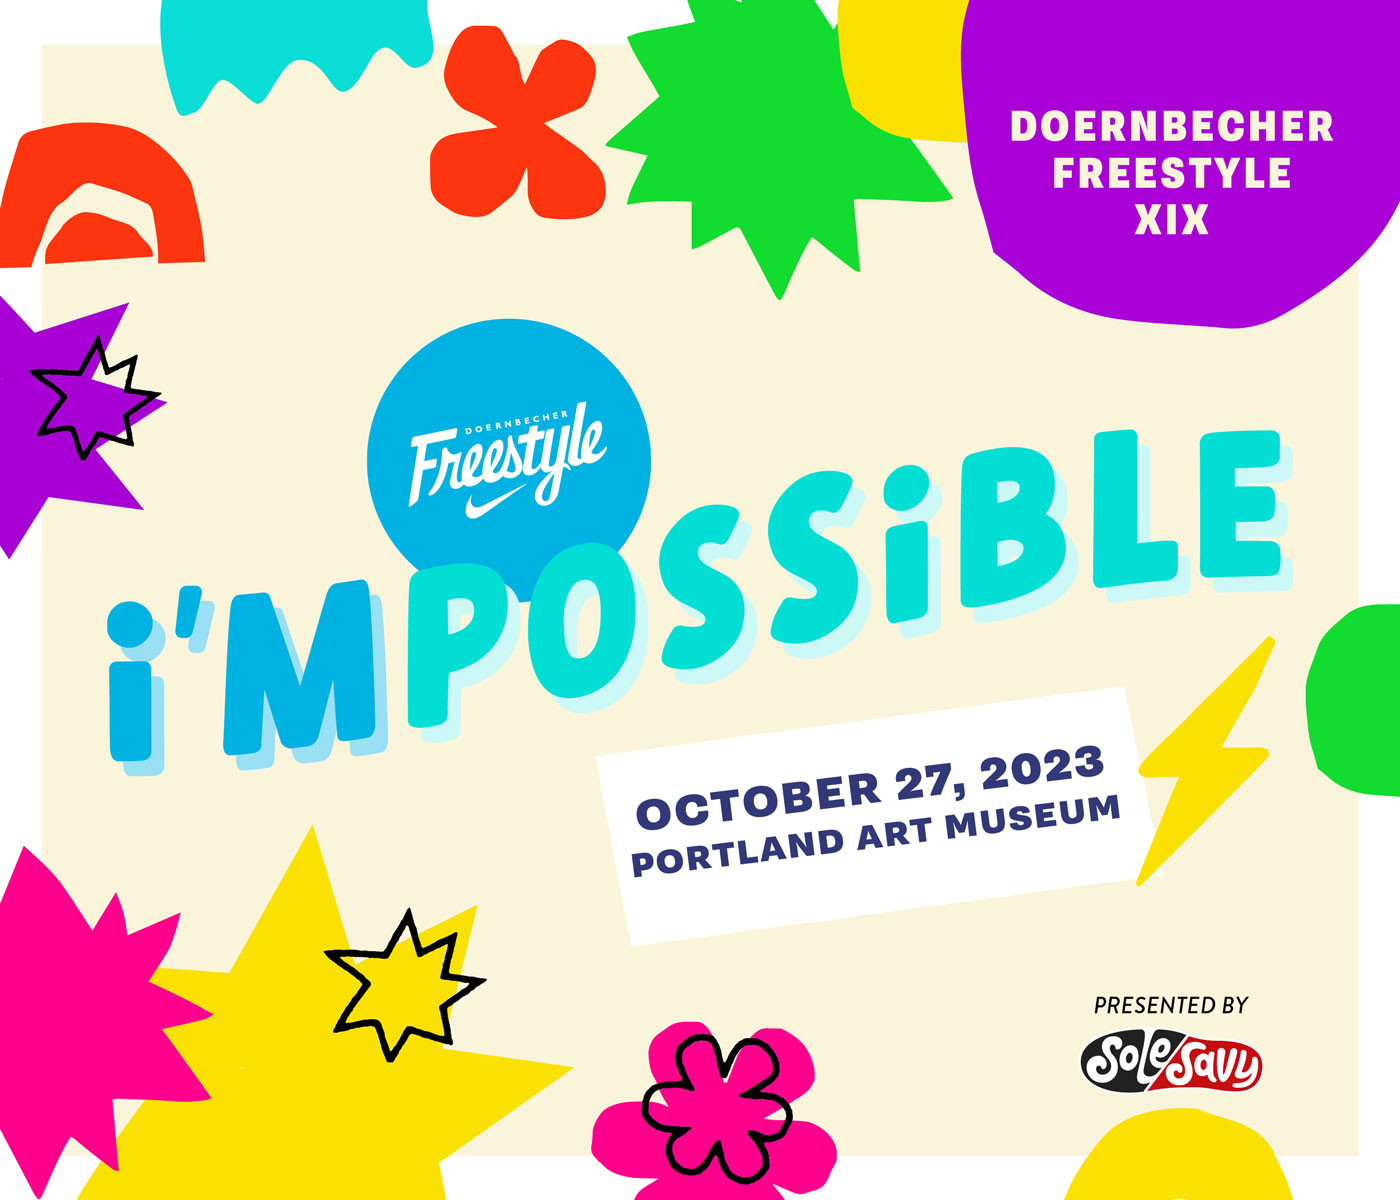 Doernbecher Freestyle i'mpossible graphic with colorful shapes on a butter yellow background